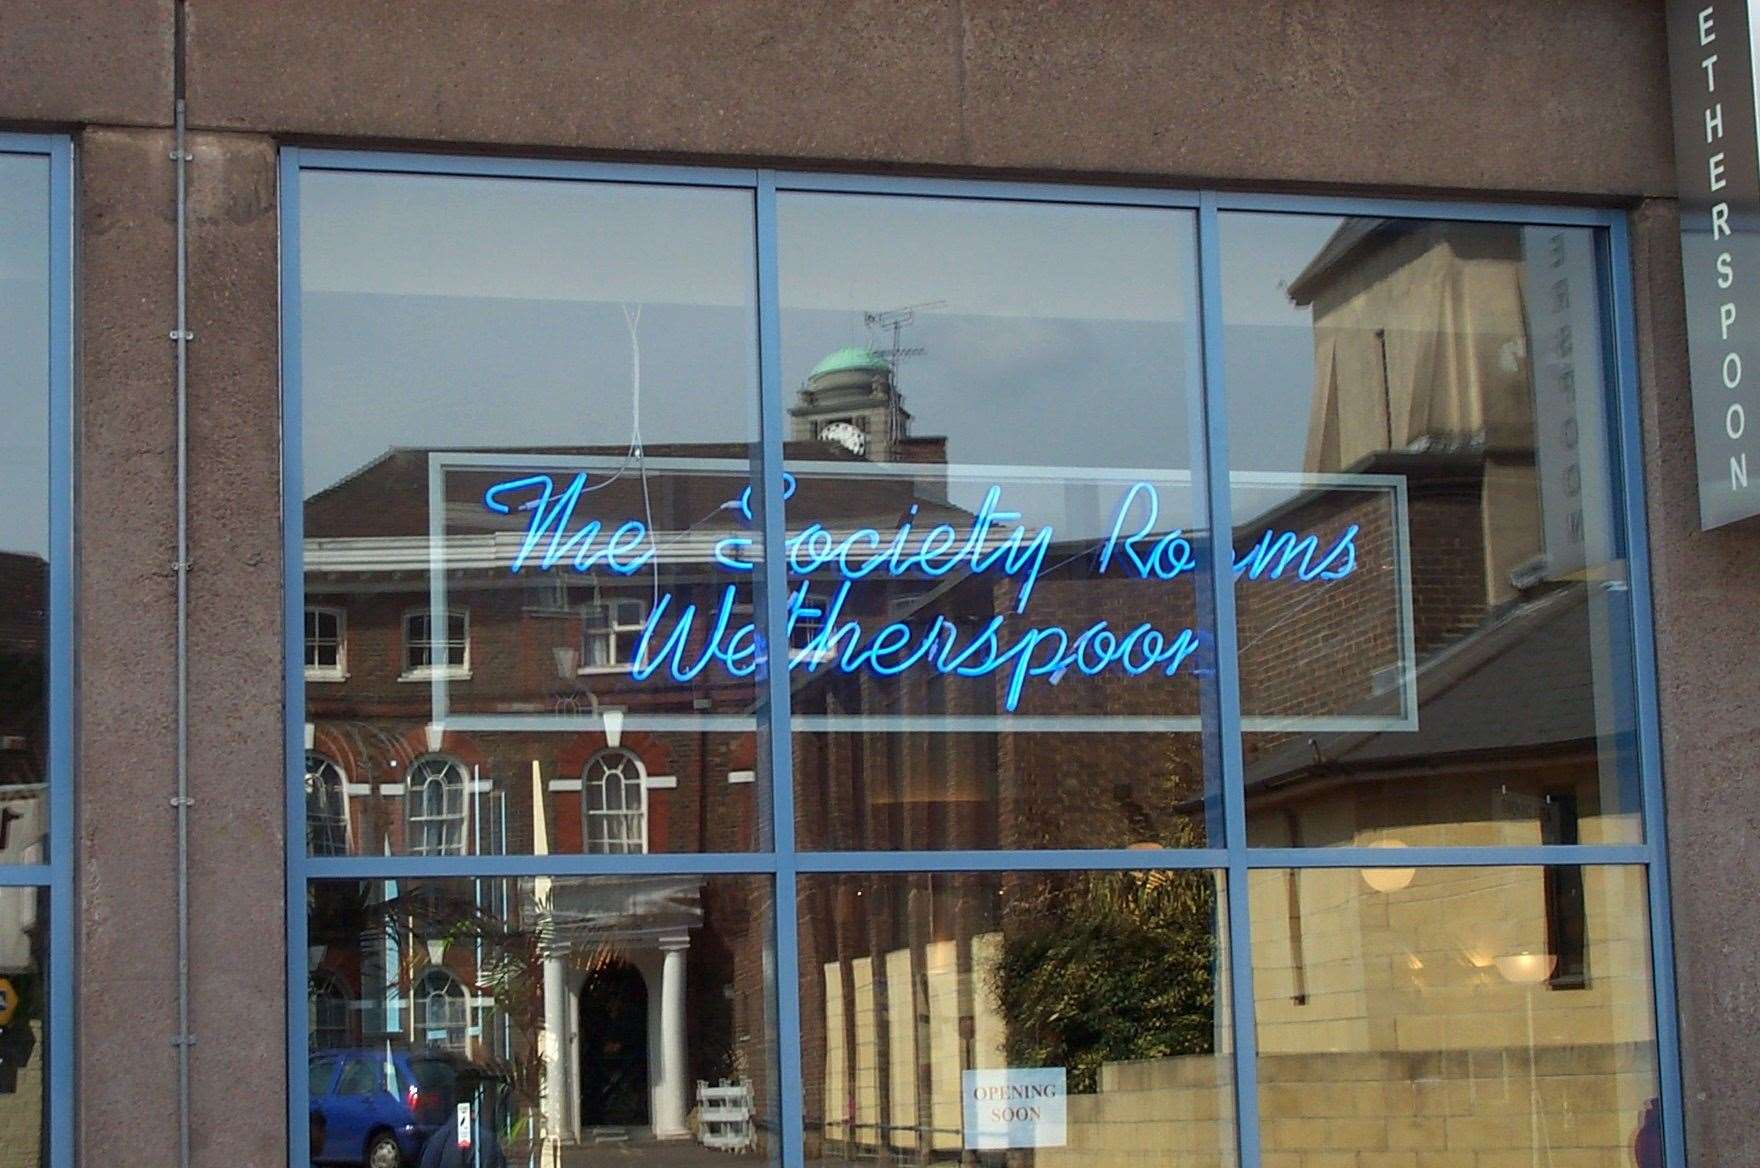 The Society Rooms opened in 2002